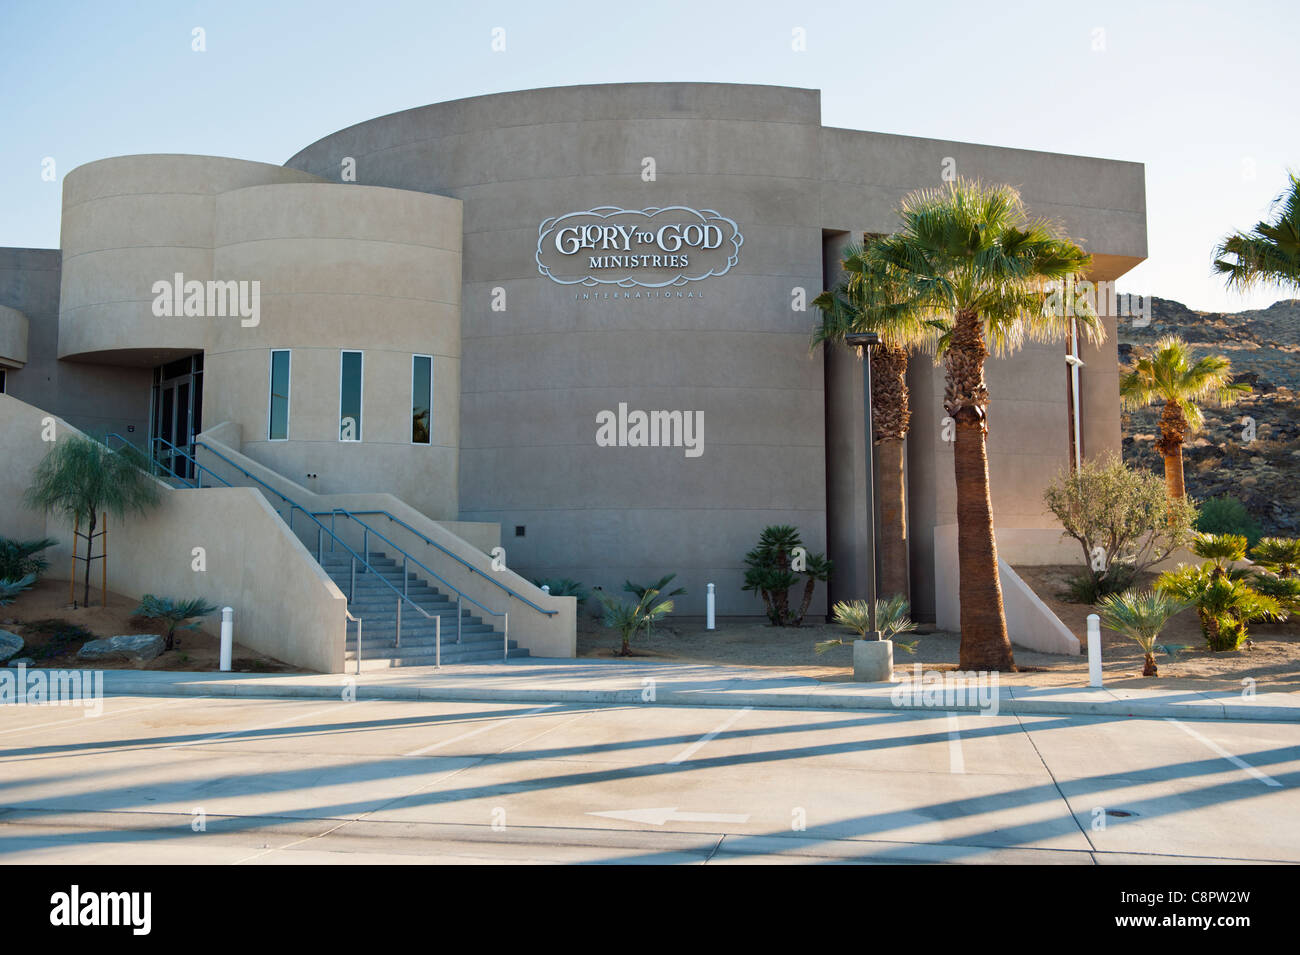 An exterior view on Glory to God Ministries in Rancho Mirage, California Stock Photo